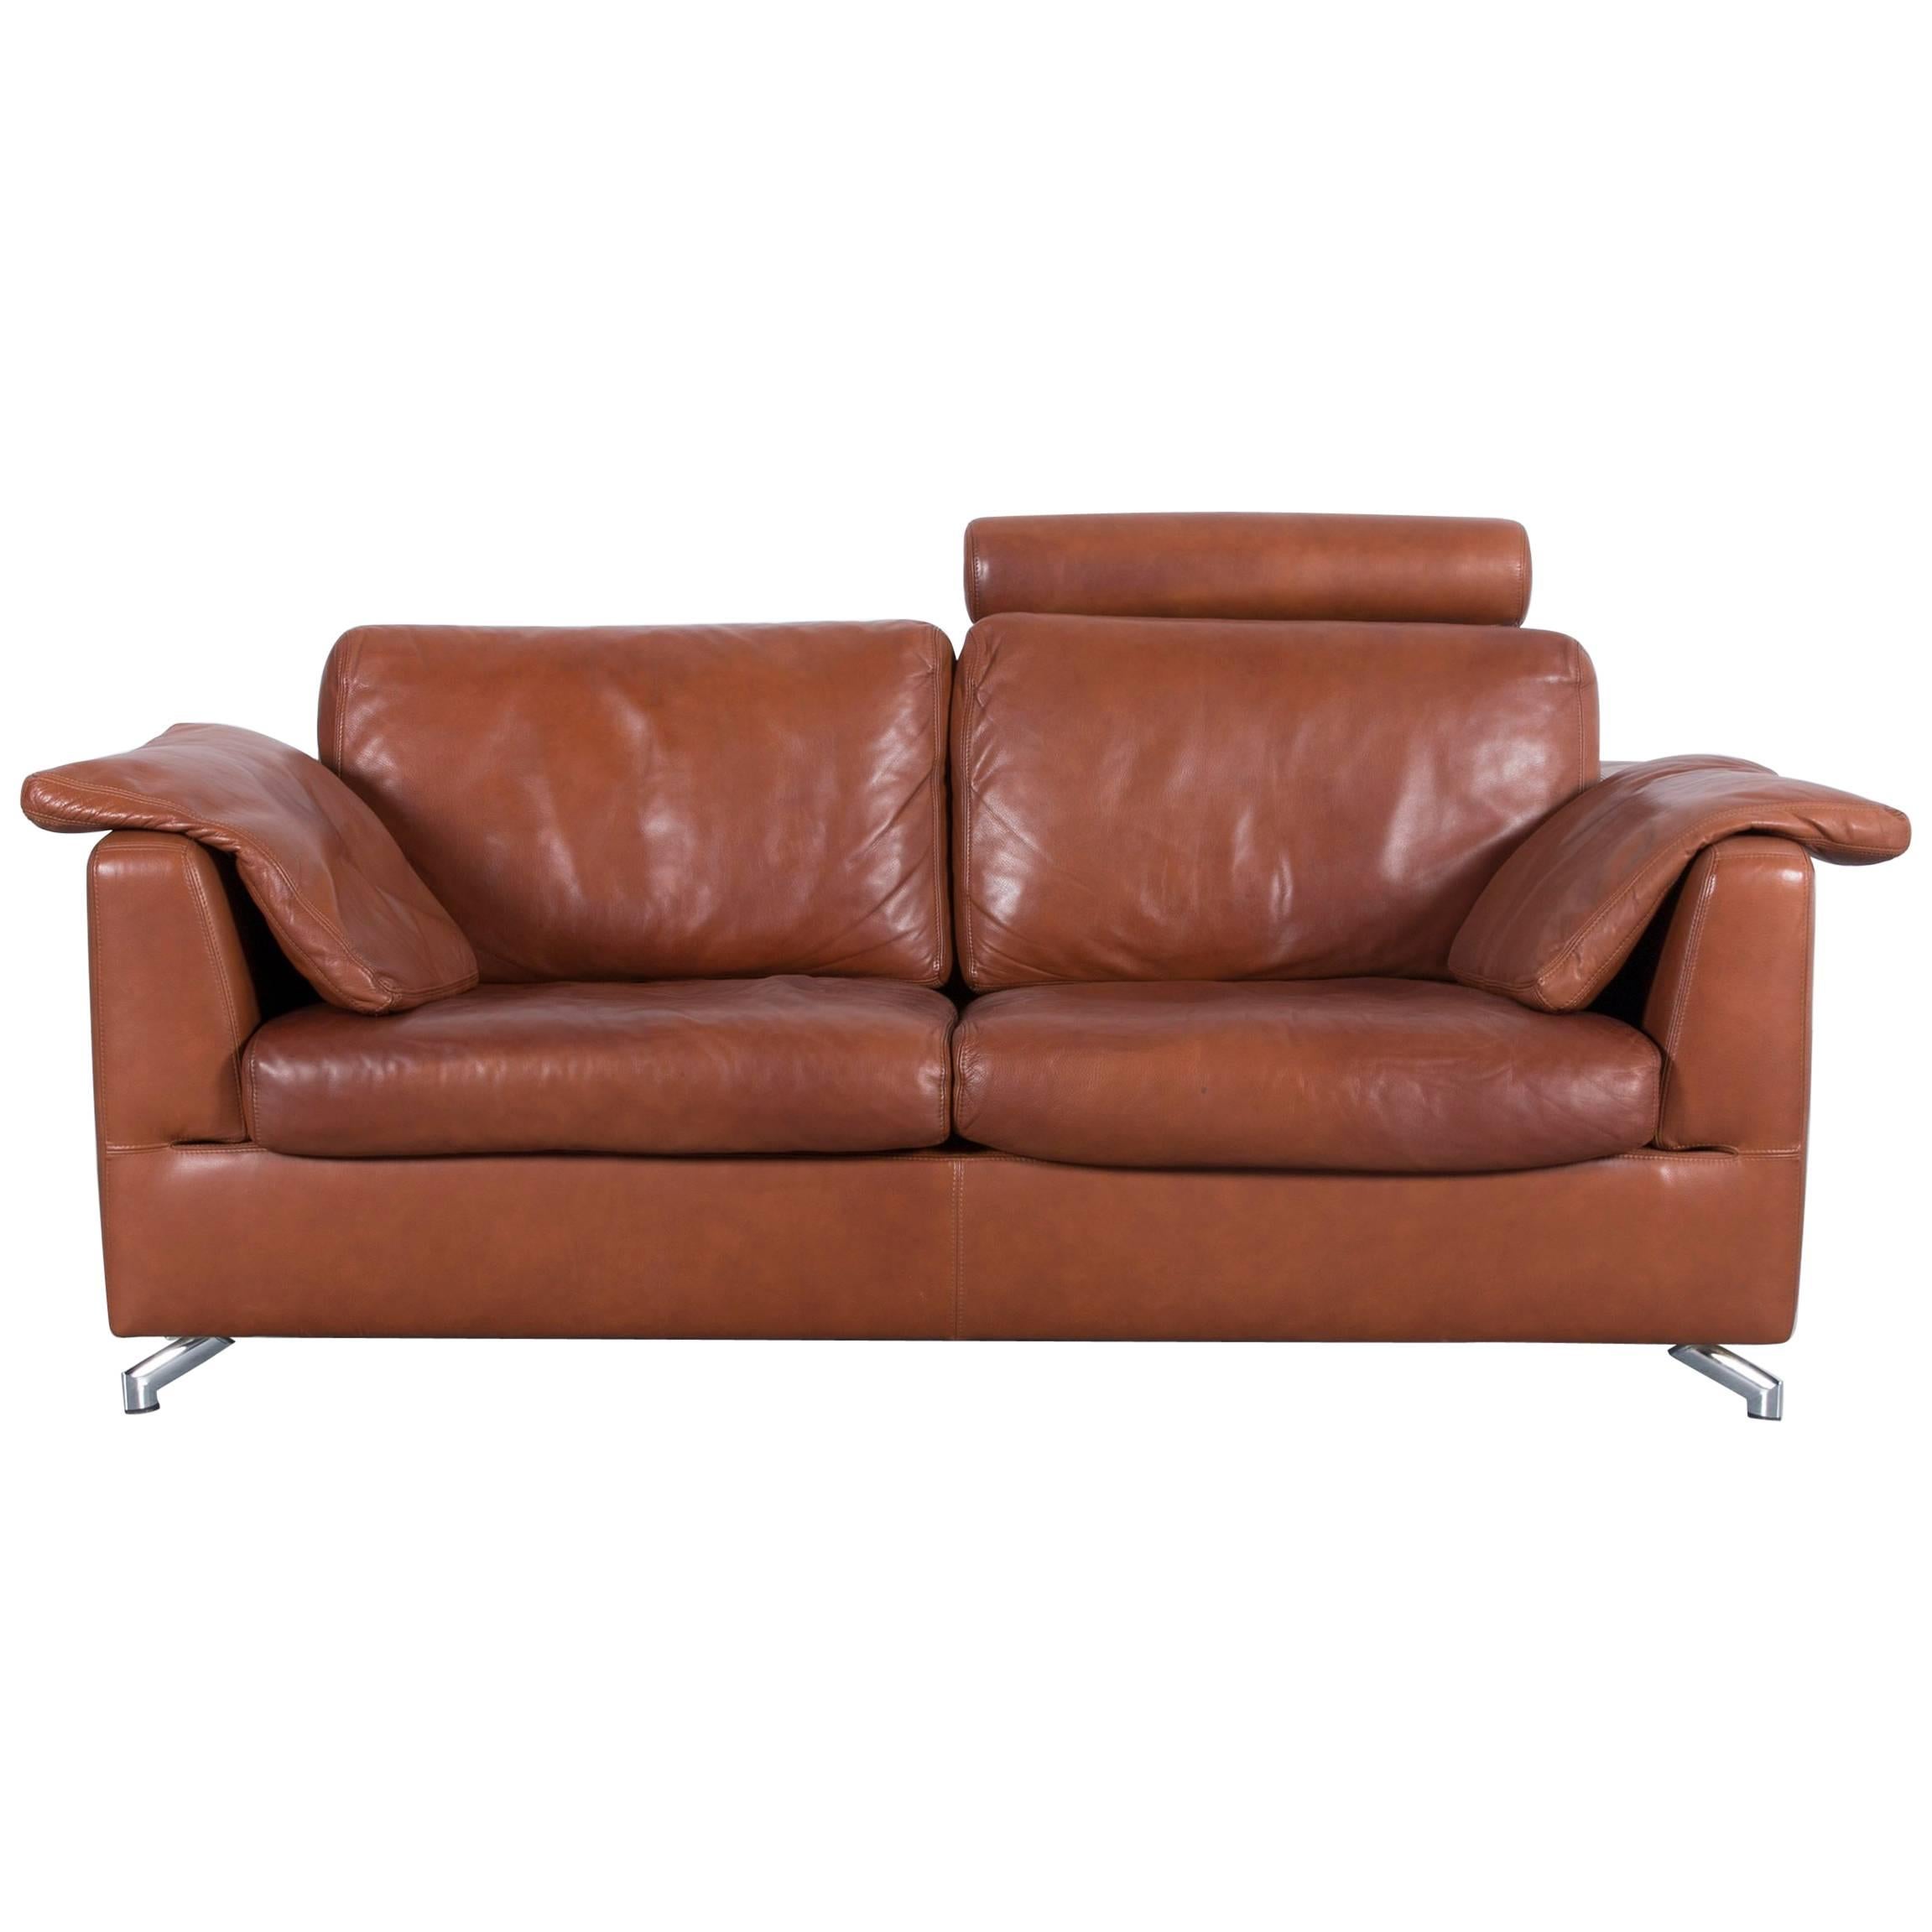 Machalke Designer Leather Sofa Brown Two-Seat Couch